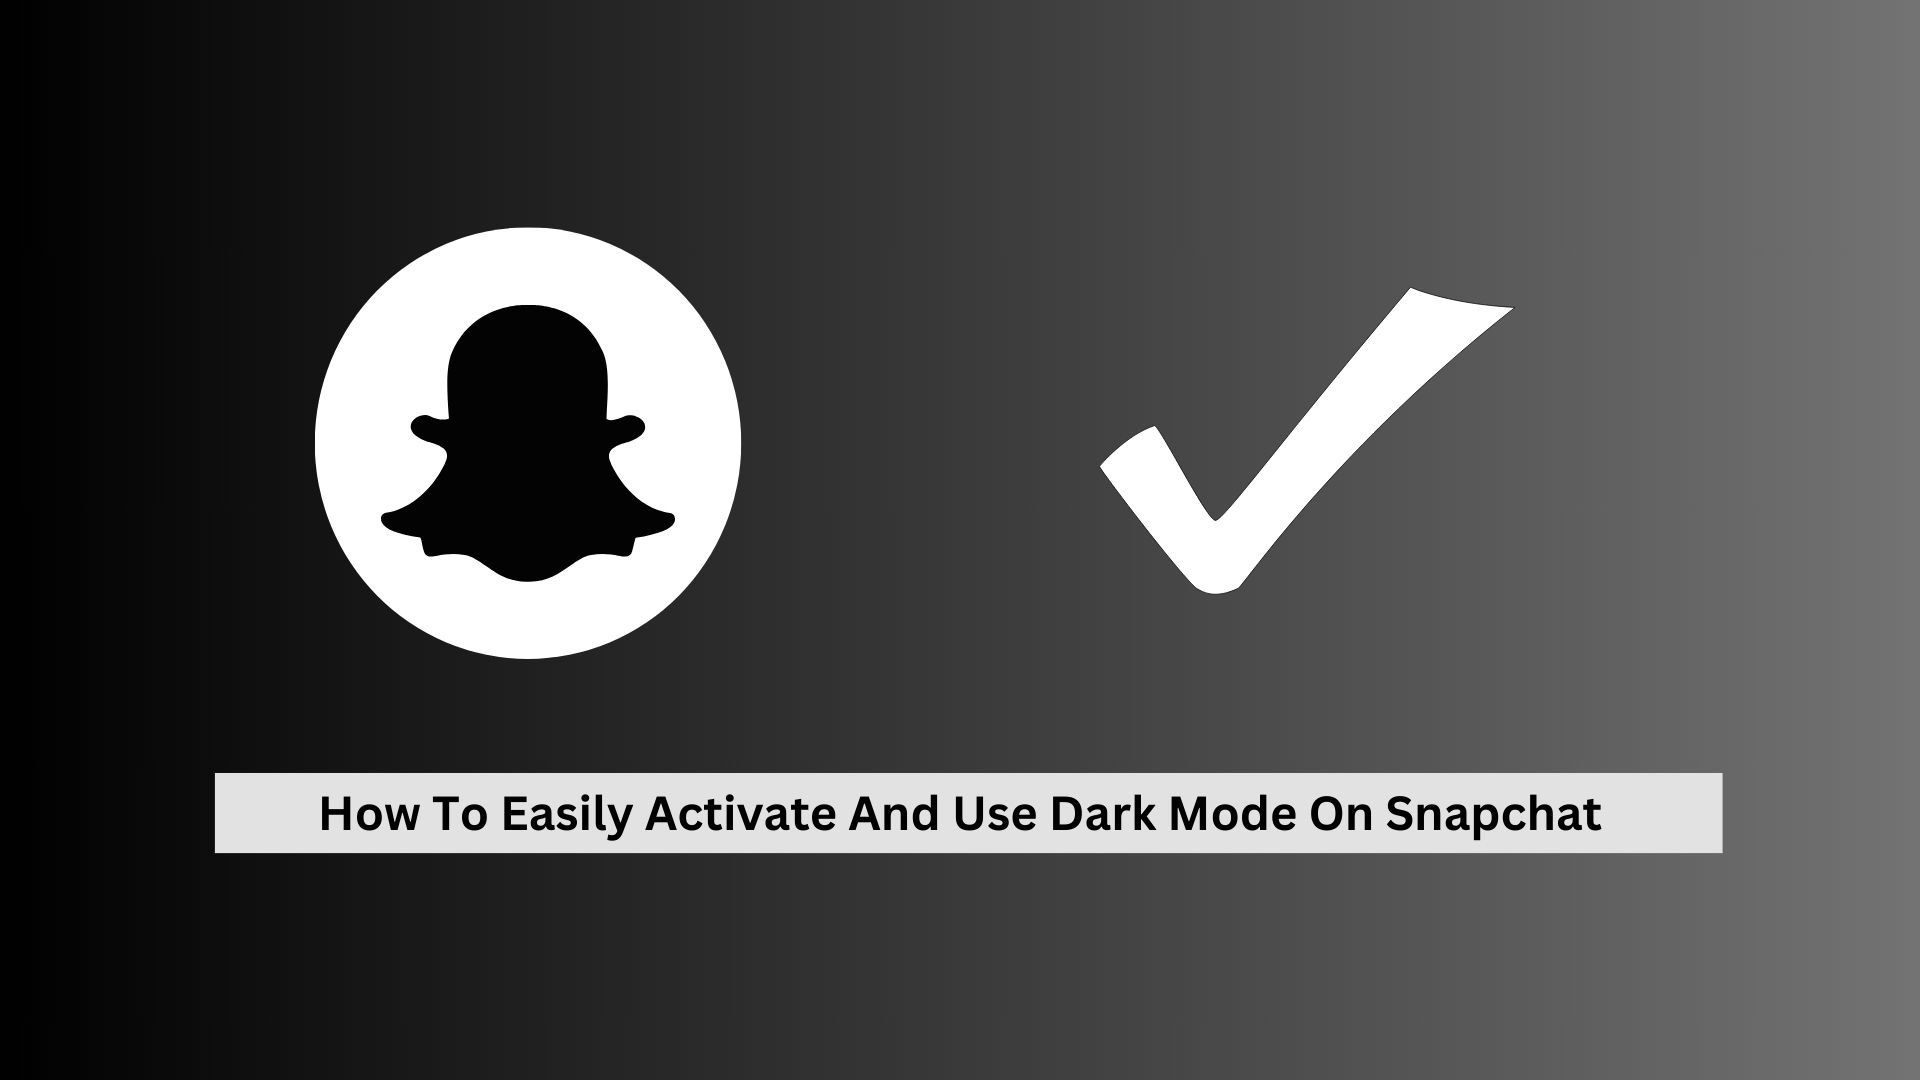 How To Easily Activate And Use Dark Mode On Snapchat